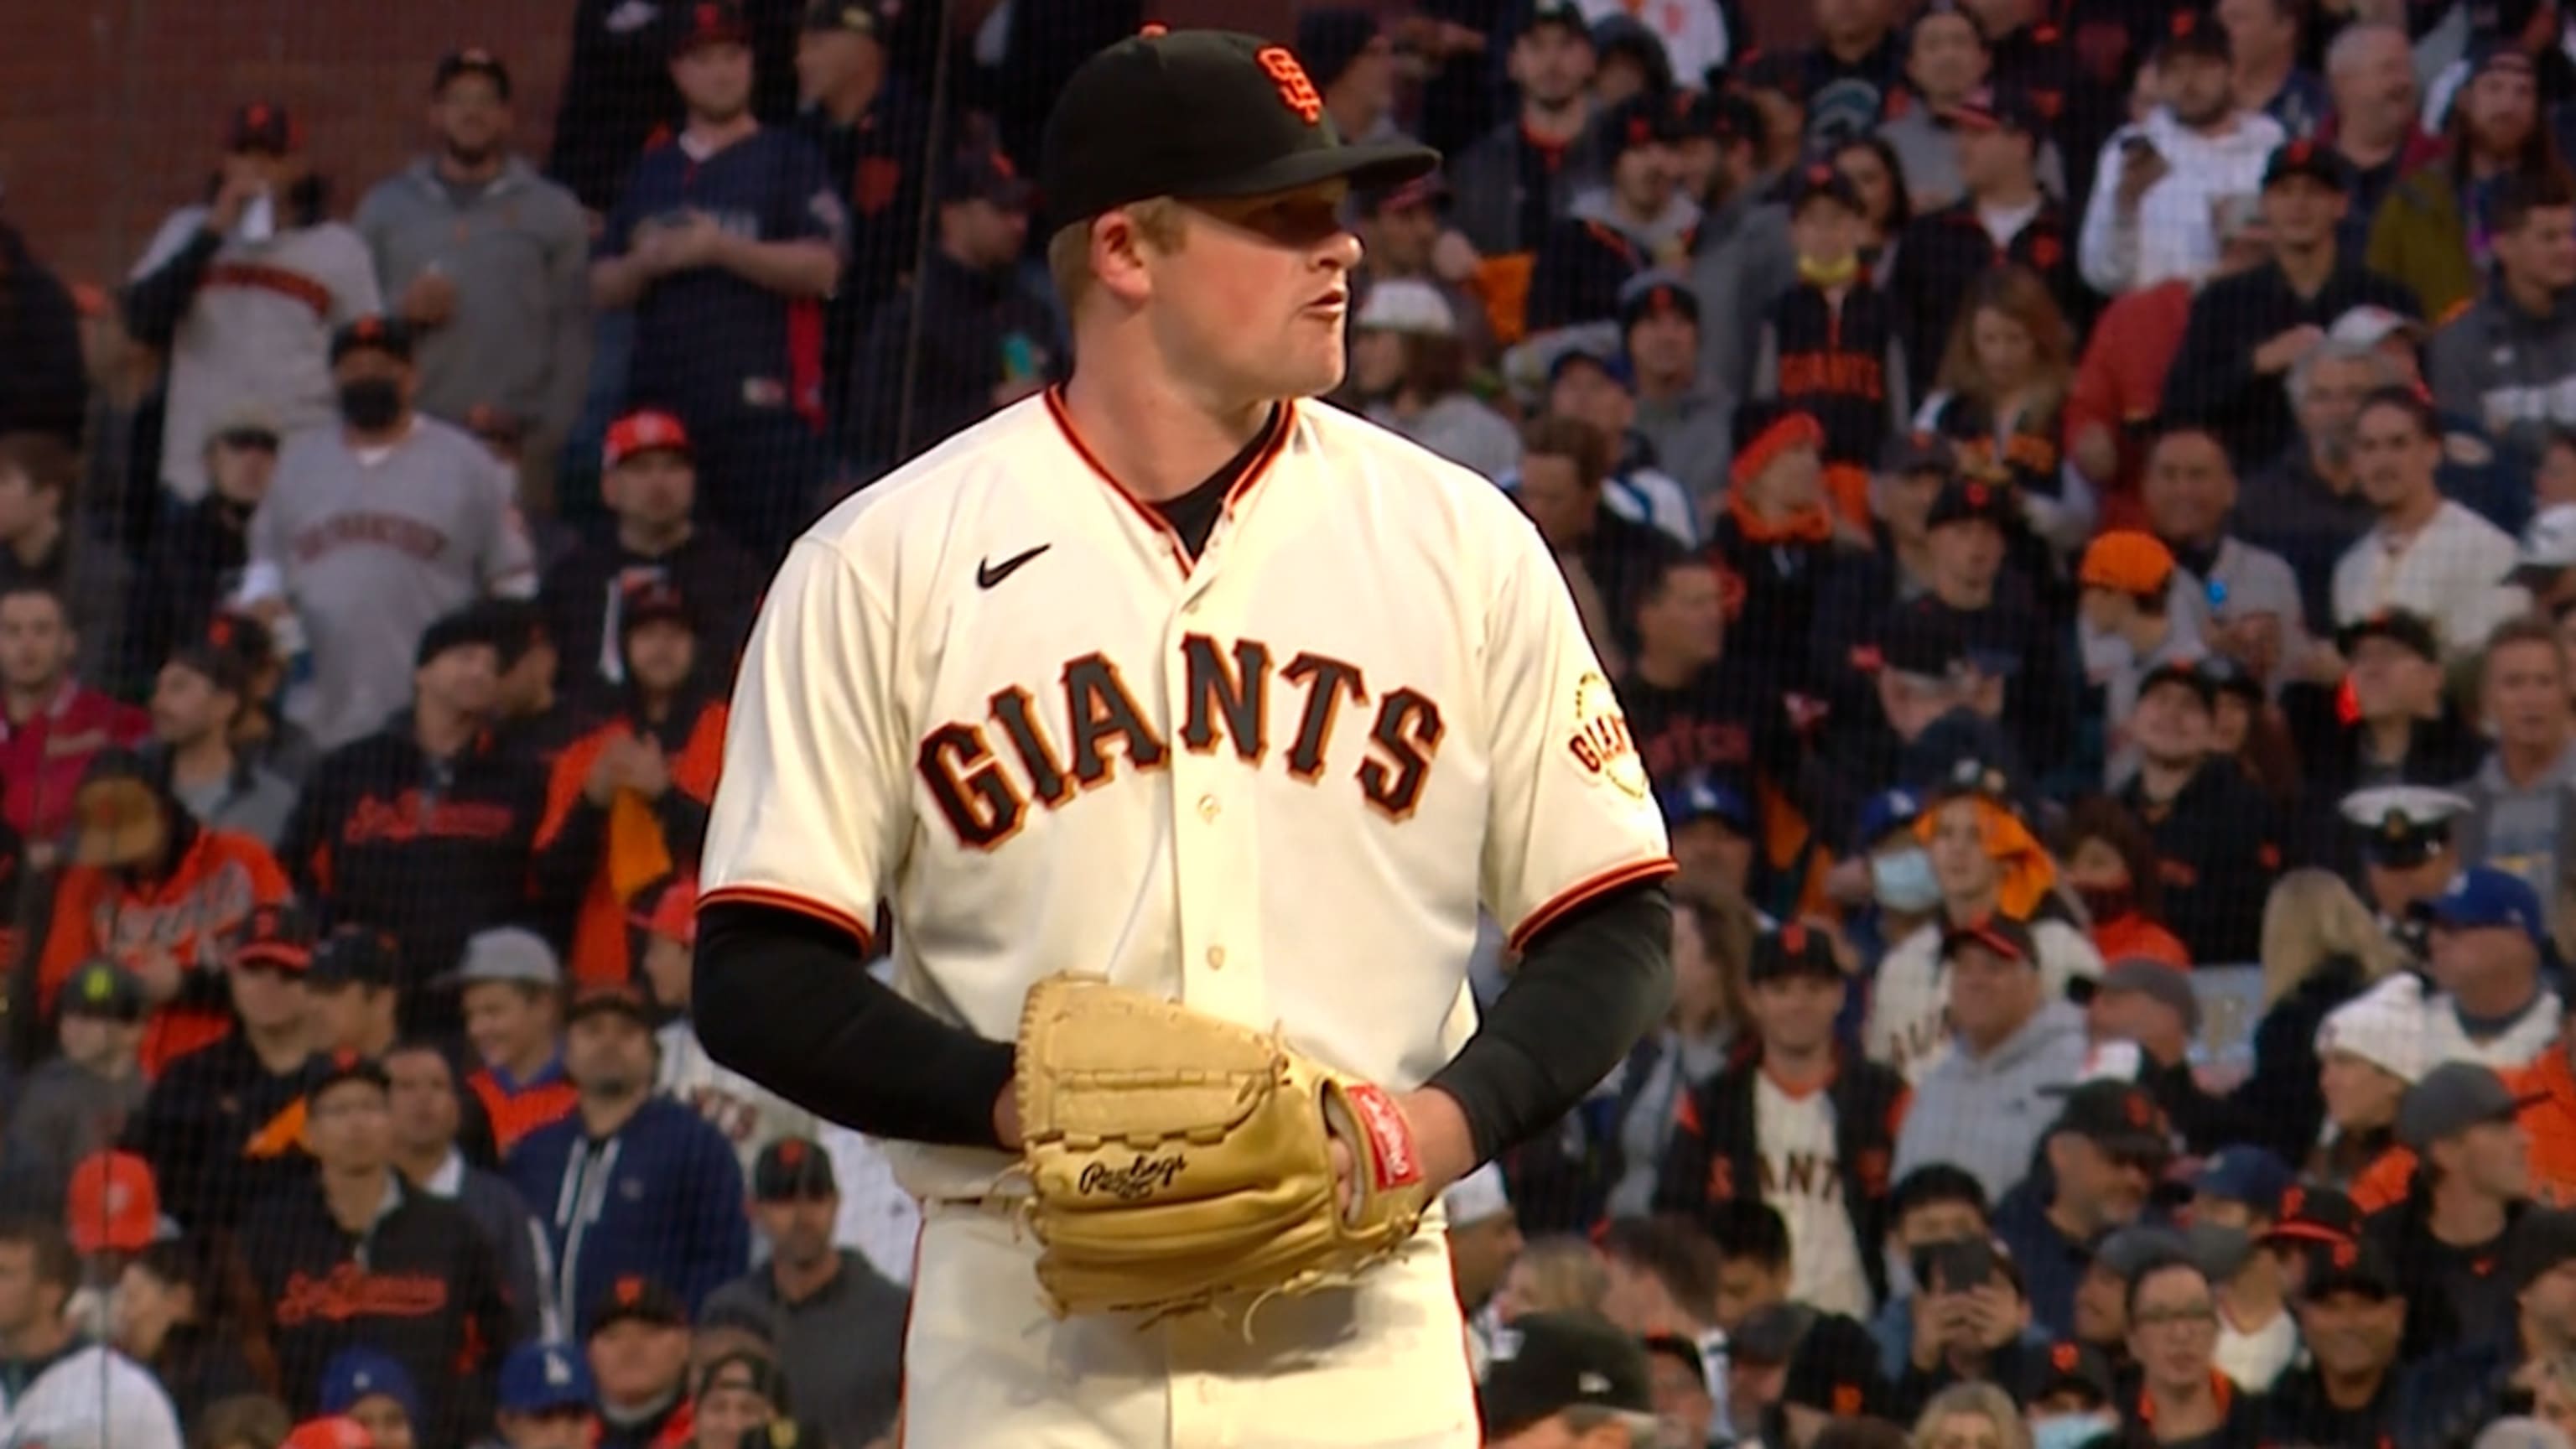 5 SF Giants players who will make the 2022 MLB All-Star team